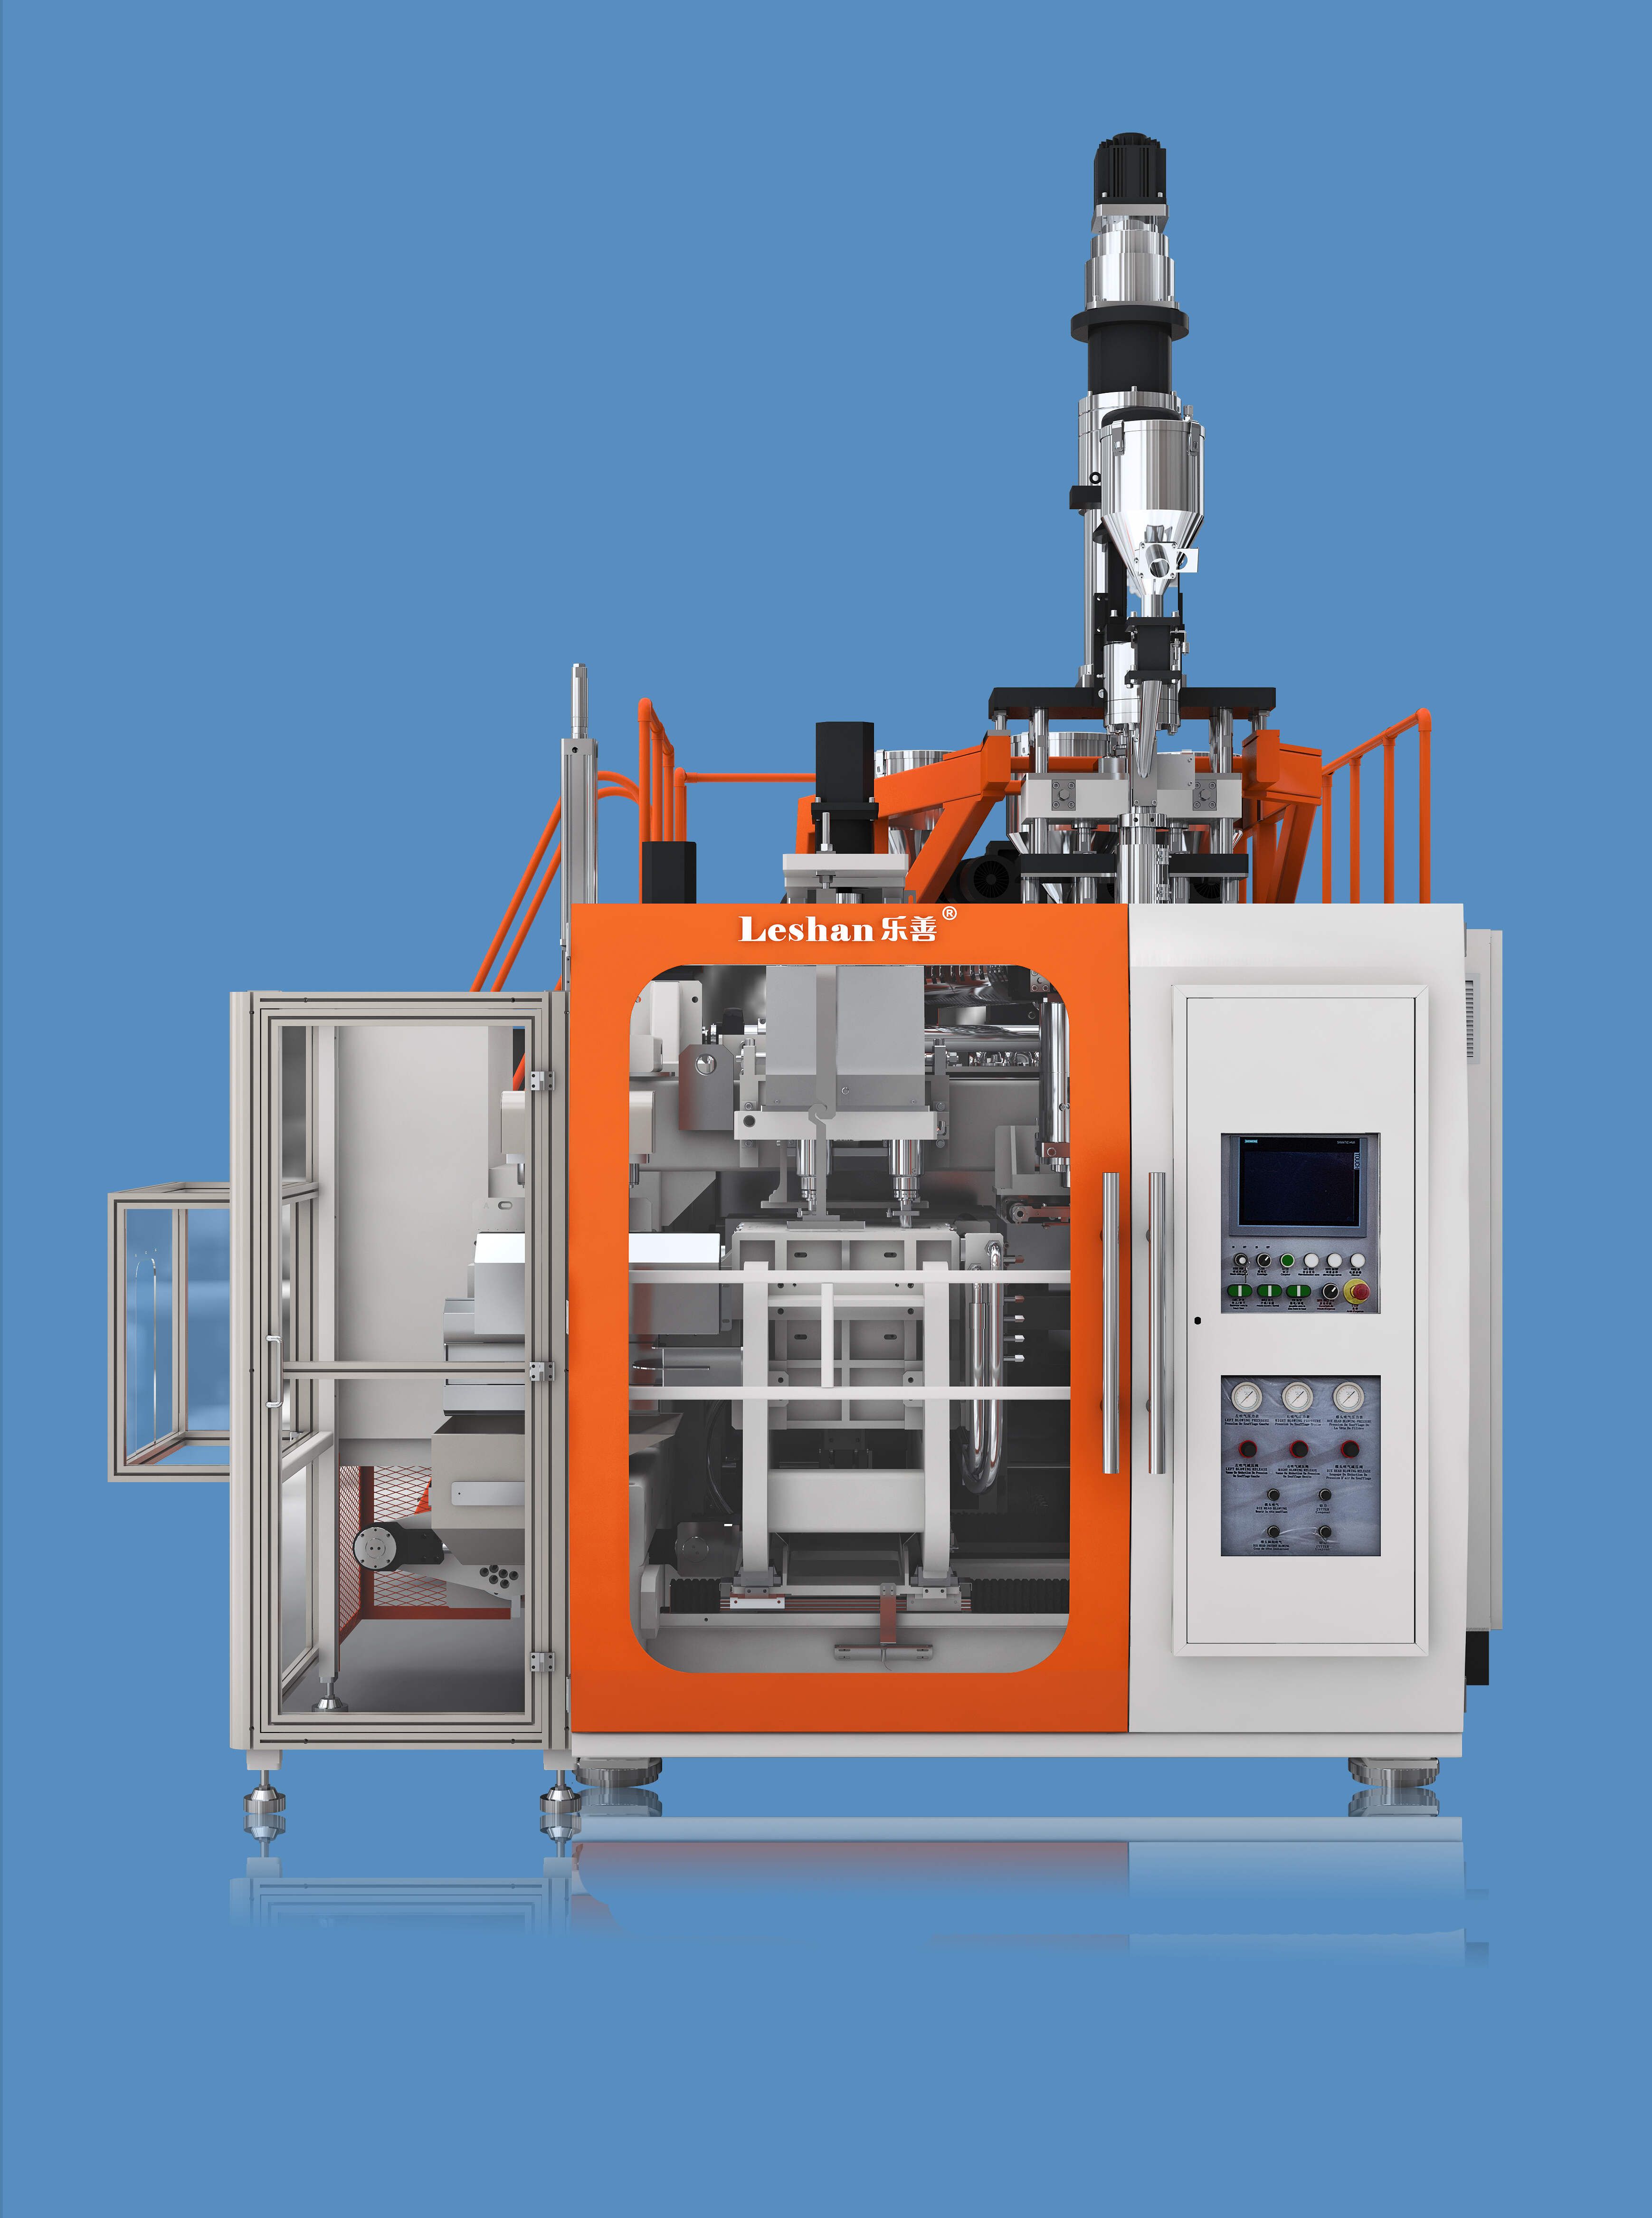 How do extrusion blow molding machines manufacturers control variables like temperature, pressure, and blow time in the blow molding process to ensure consistent product quality?